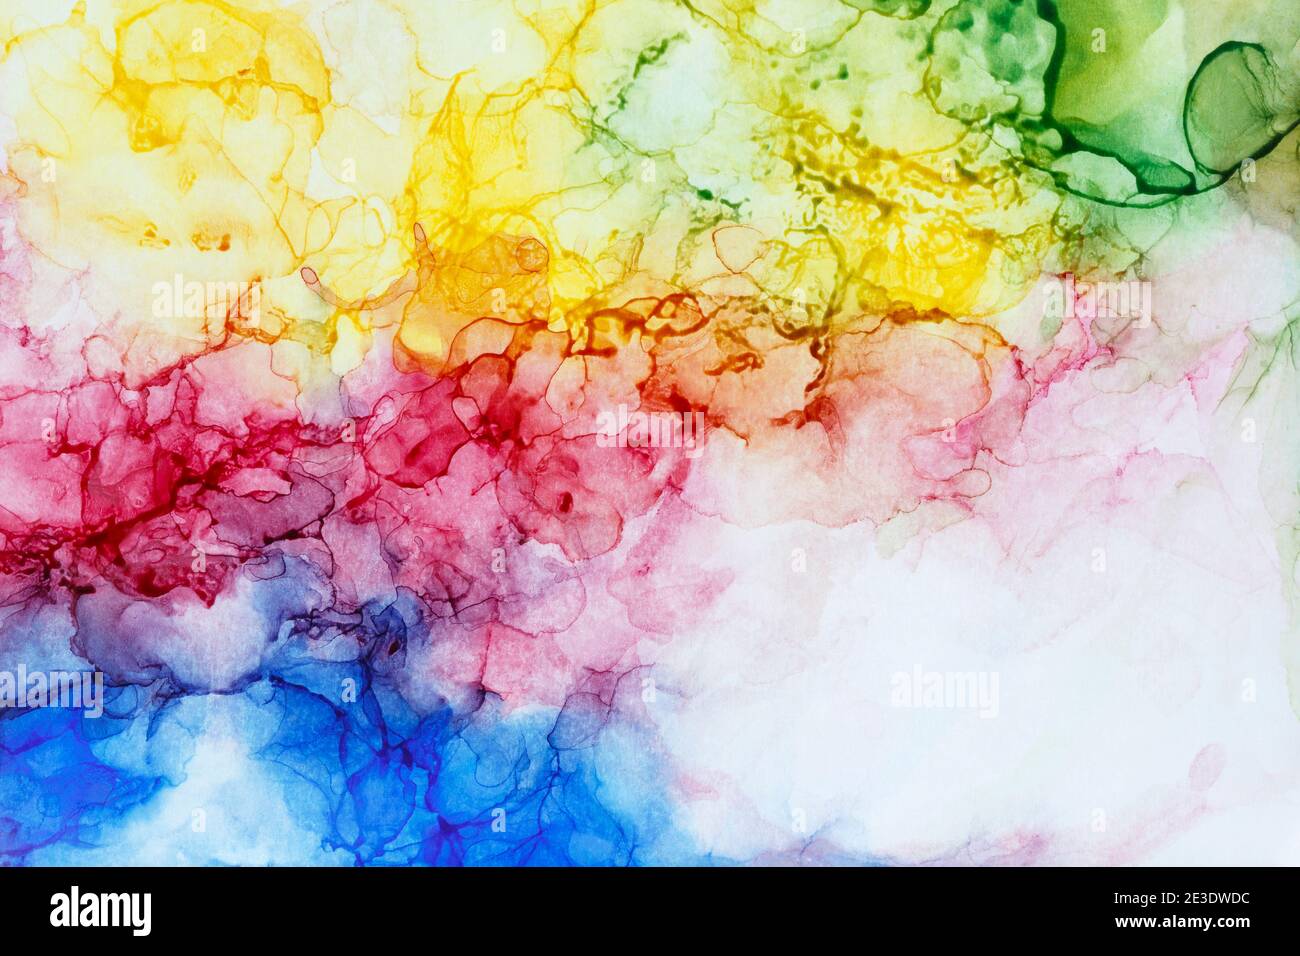 Colorful Ink Paint Textured Background